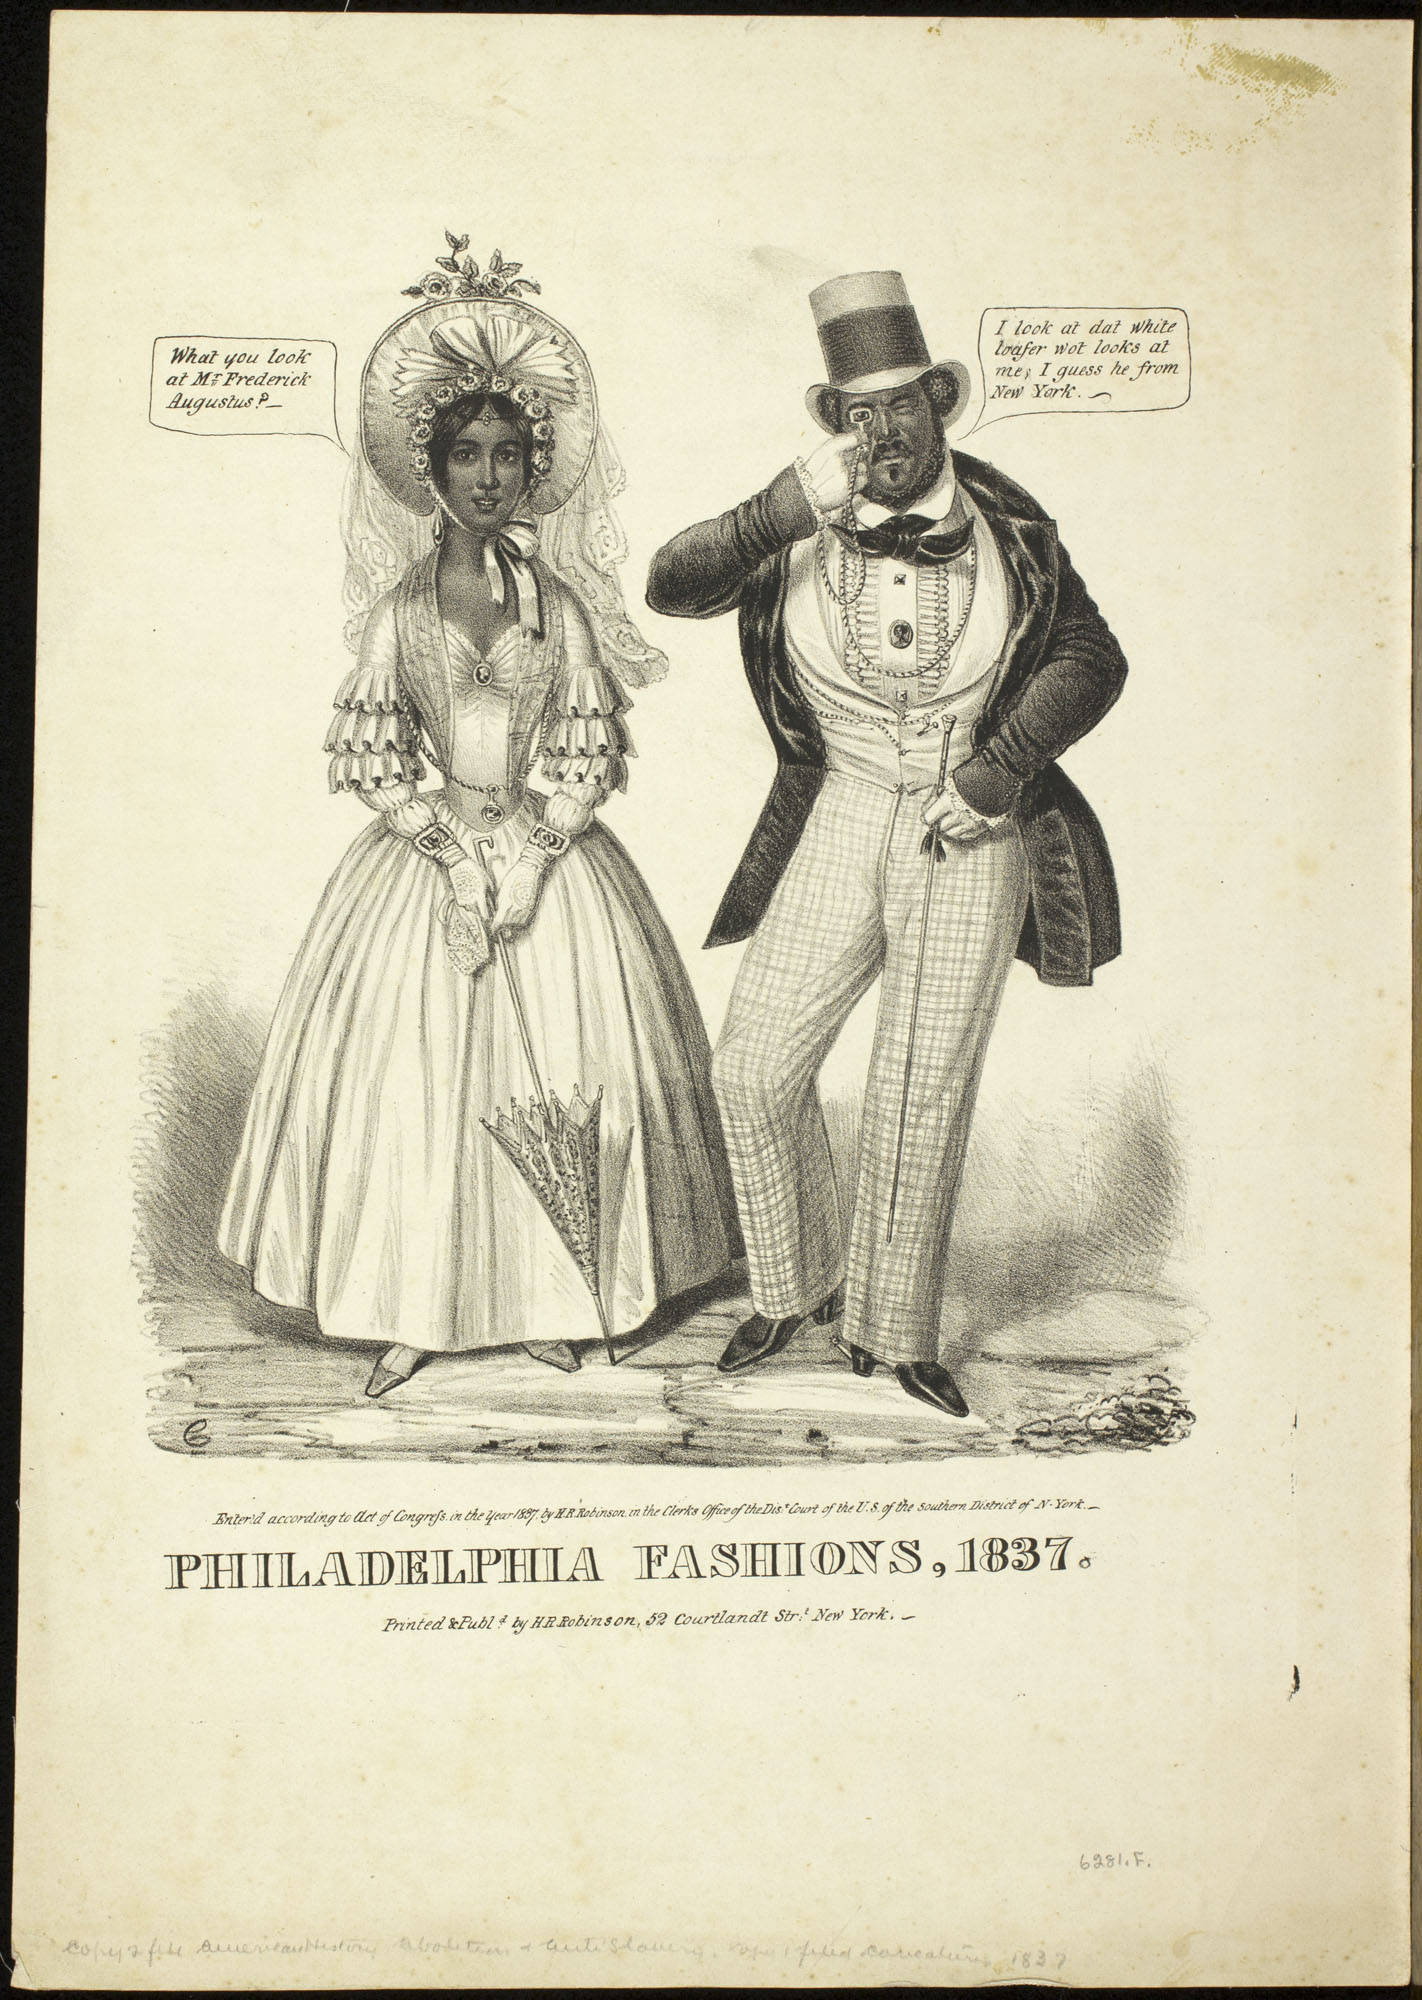 A cartoon of a well-off African American couple in Philadelphia.